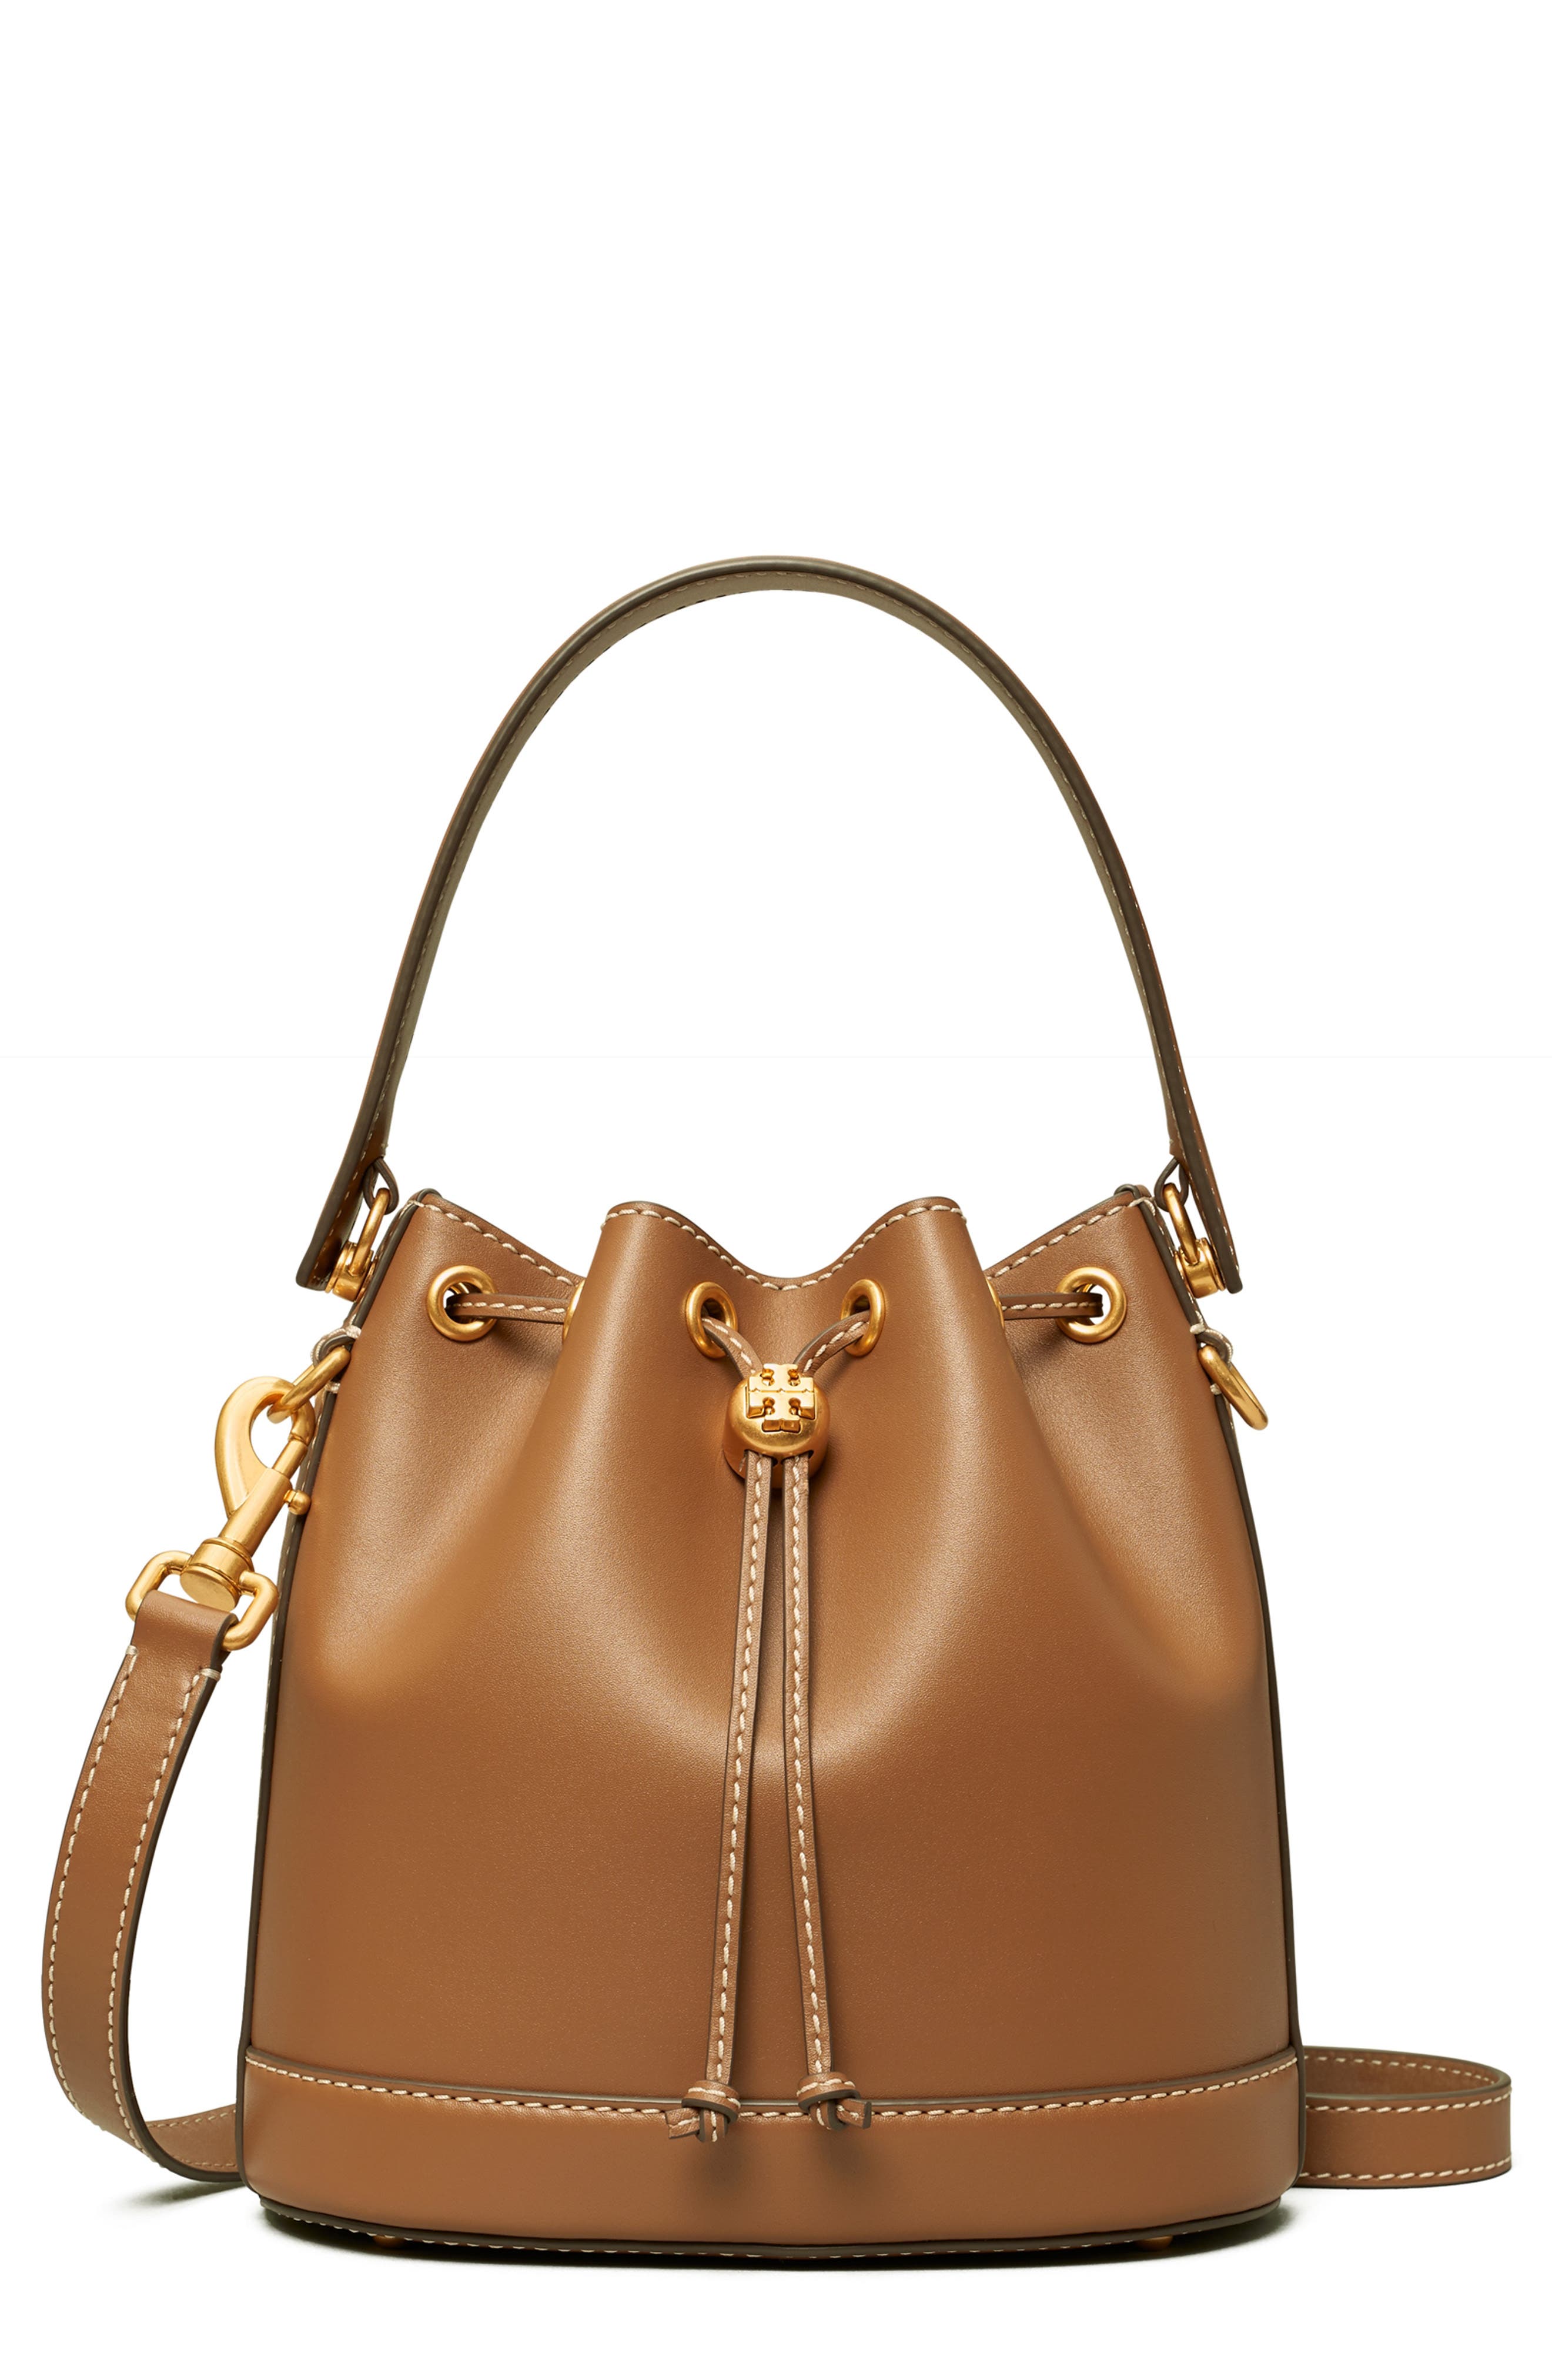 LAutre Chose Handbag in Brown Womens Bags Bucket bags and bucket purses 